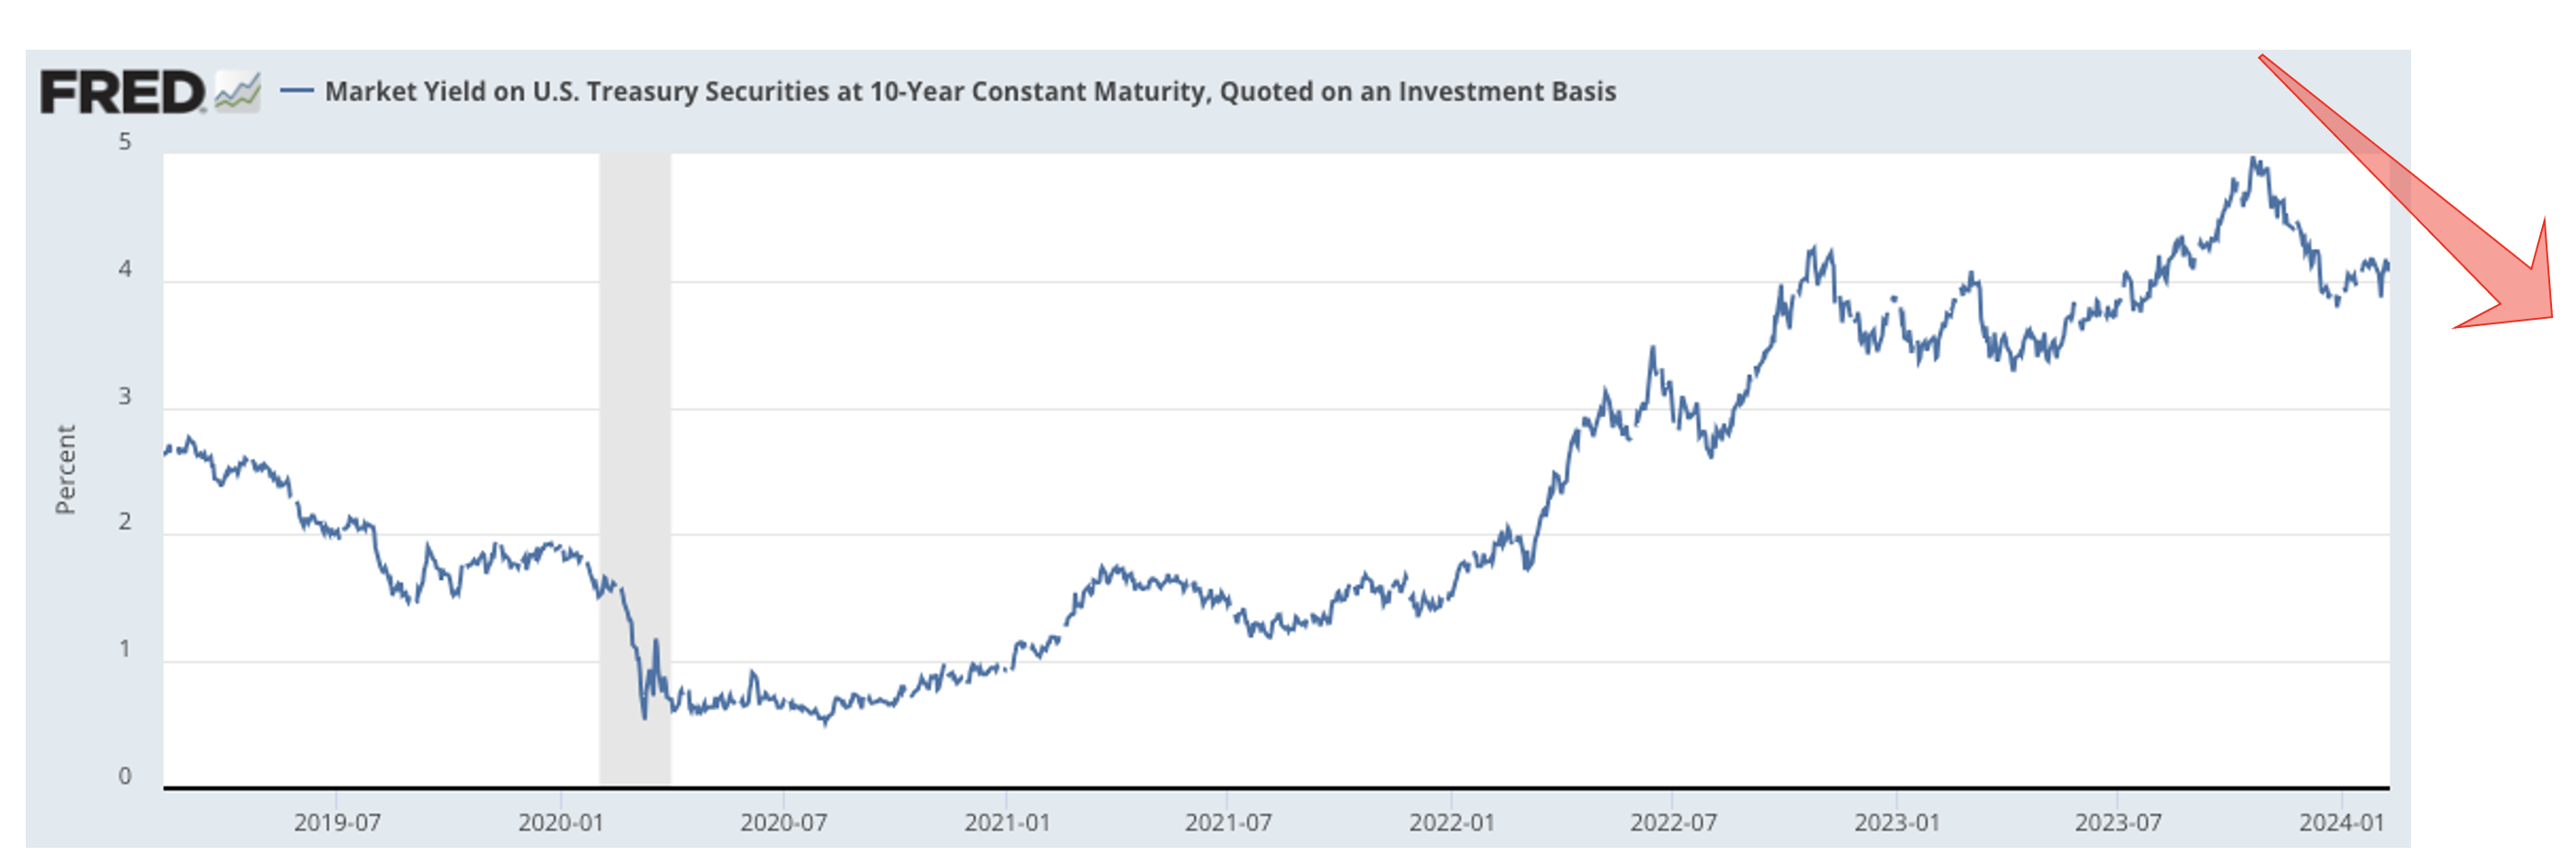  Market Yield on U.S. Treasury Securities at 10-Year Constant Maturity, Quoted on an Investment Basis (DGS10)